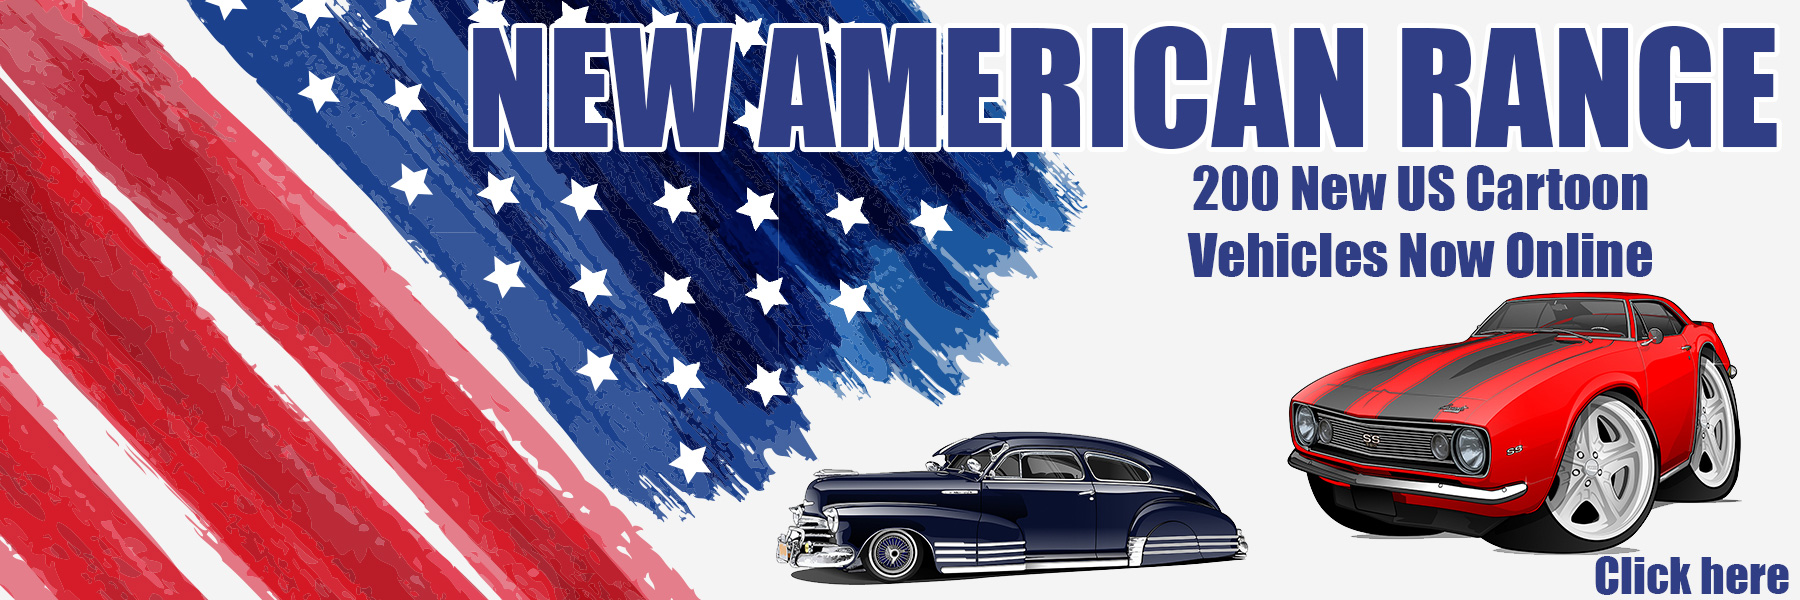 New American Range of 200 vehicles now available online